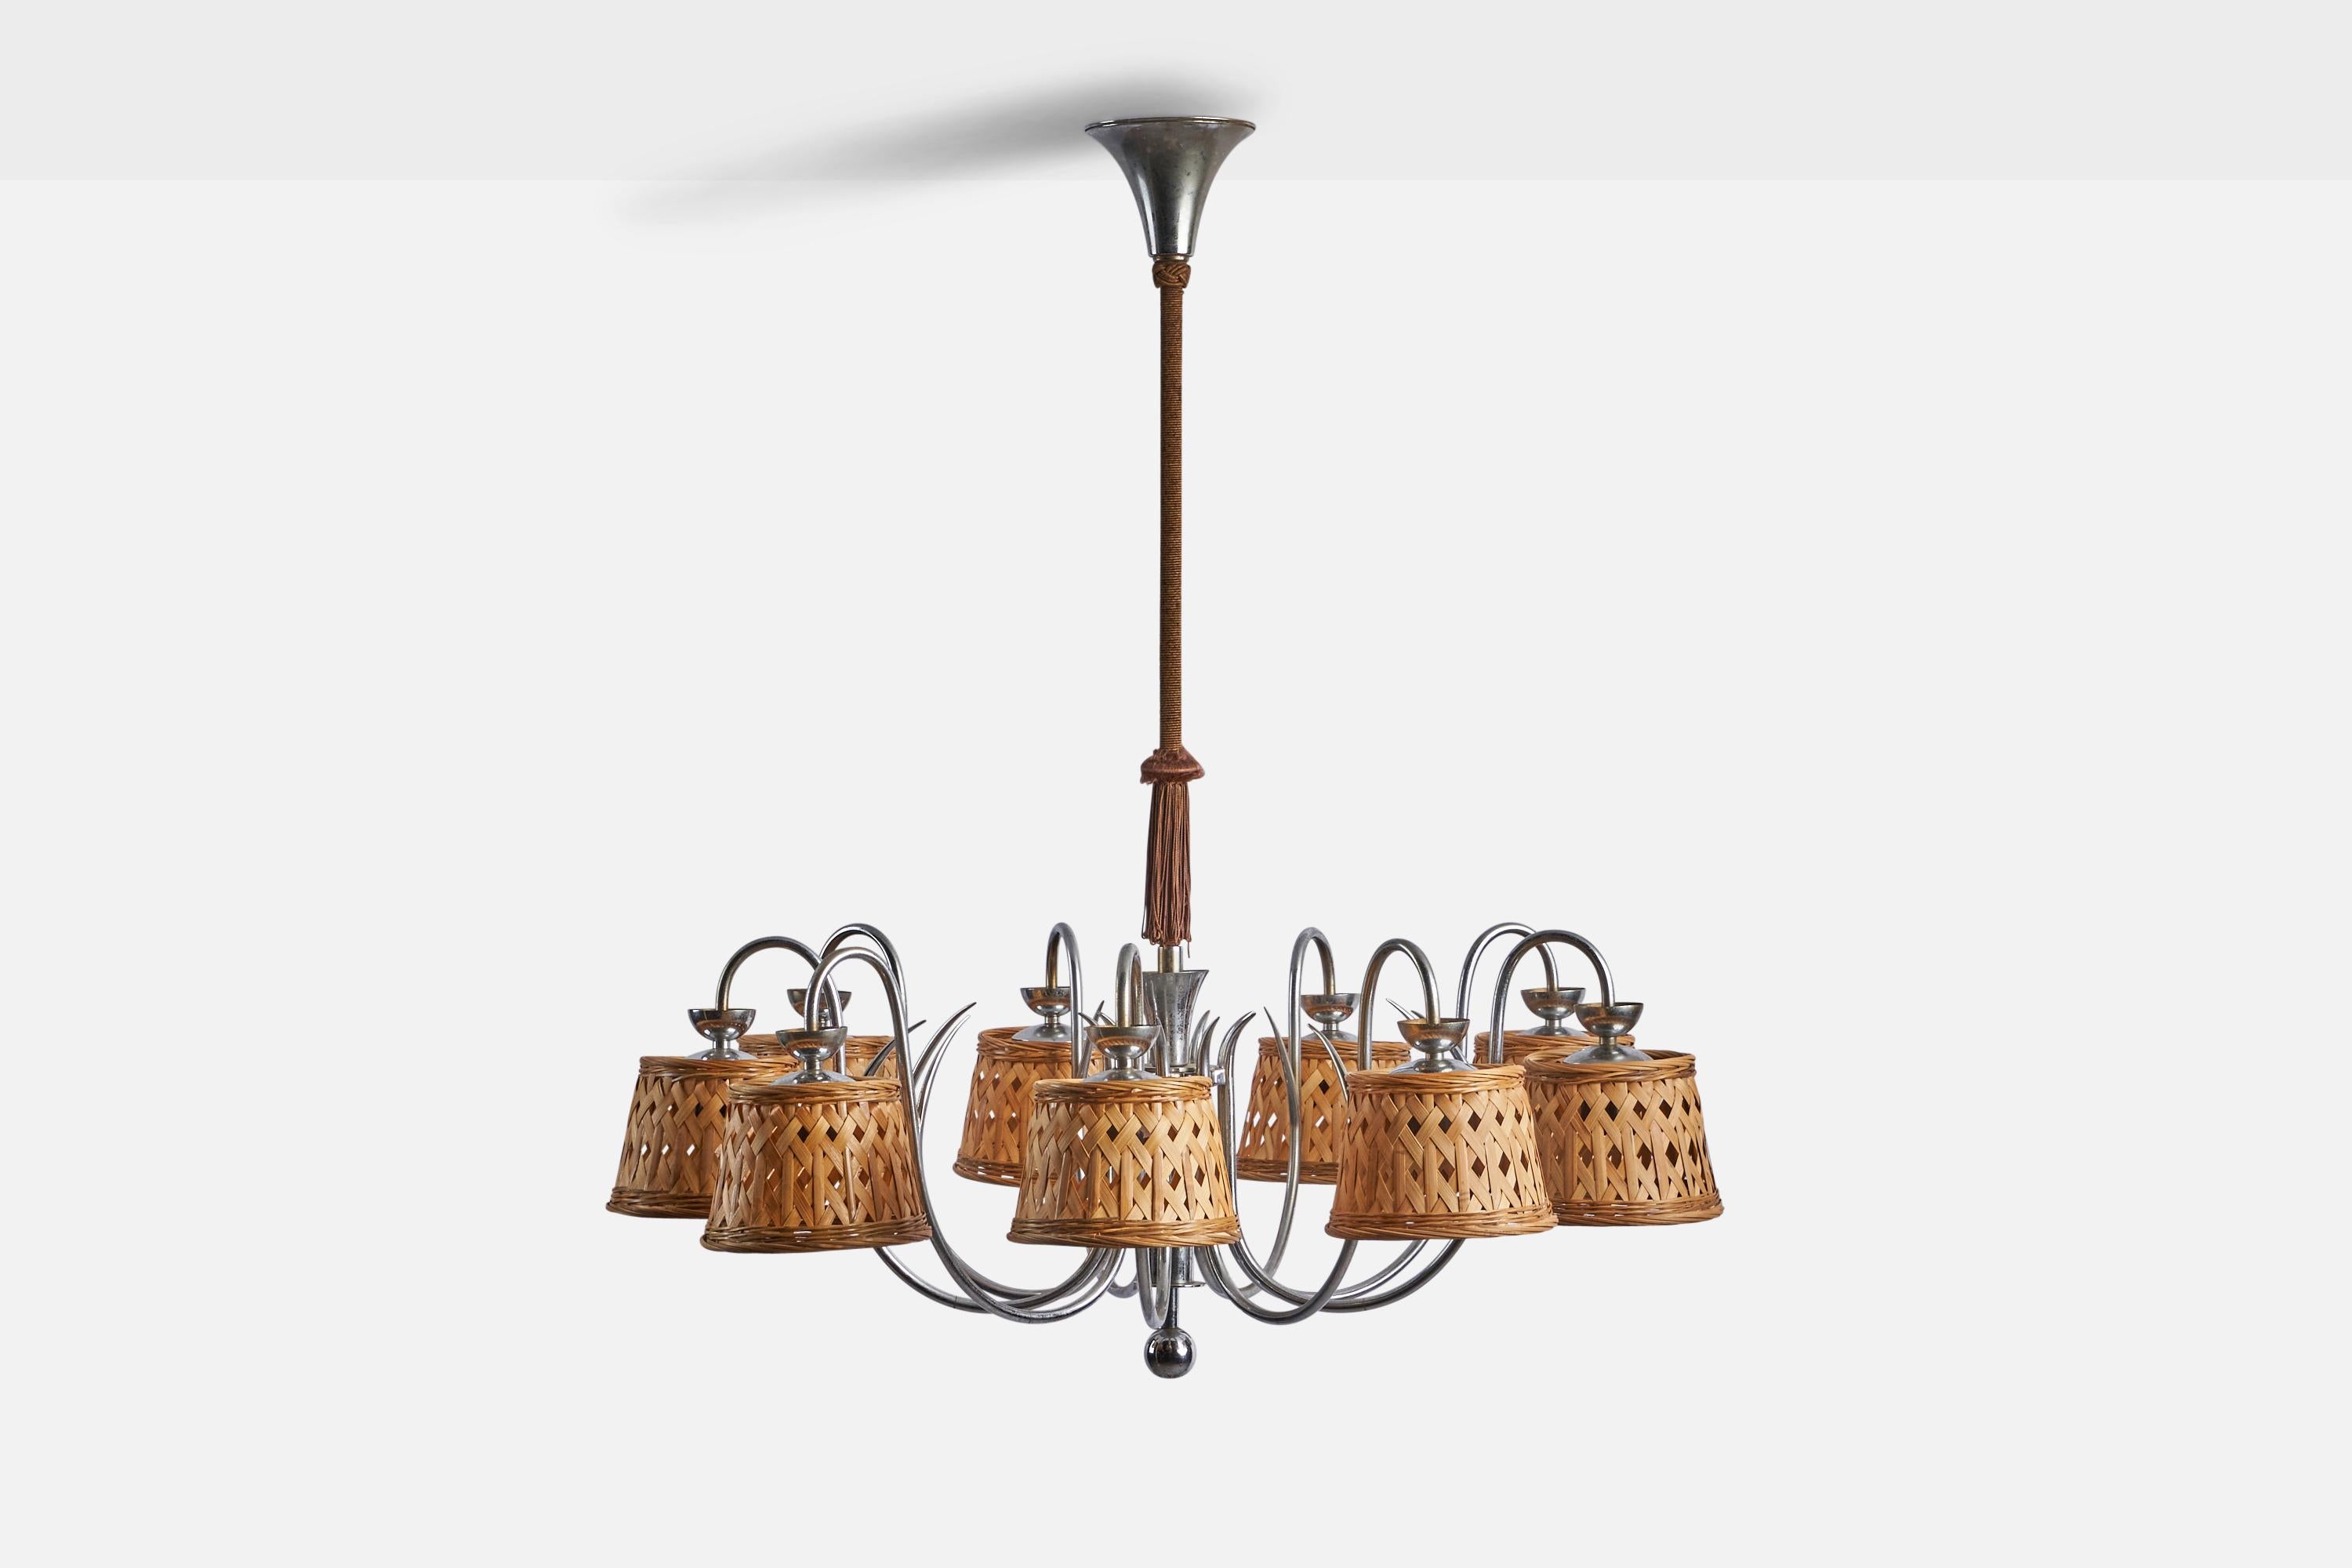 A sizeable nine-armed steel, brown fabric cord and rattan chandelier designed and produced in Denmark, c. 1930s.

Overall Dimensions (inches): 39” H x 31” Diameter
Bulb Specifications: E-26 Bulb
Number of Sockets: 9
Assorted vintage rattan